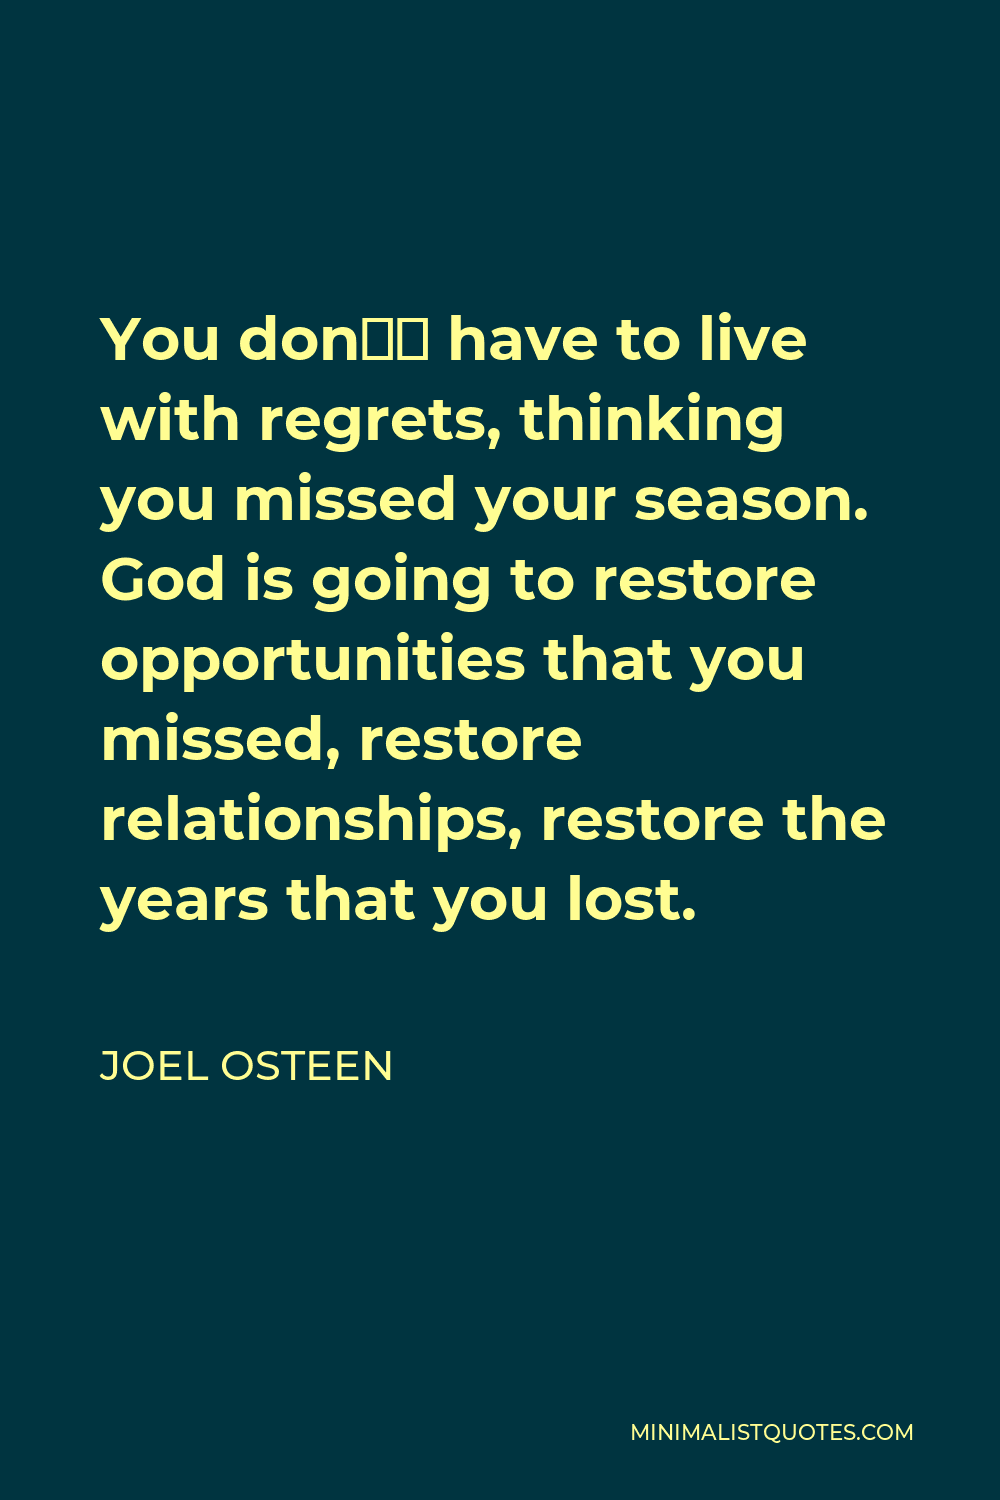 Joel Osteen Quote - You don’t have to live with regrets, thinking you missed your season. God is going to restore opportunities that you missed, restore relationships, restore the years that you lost.